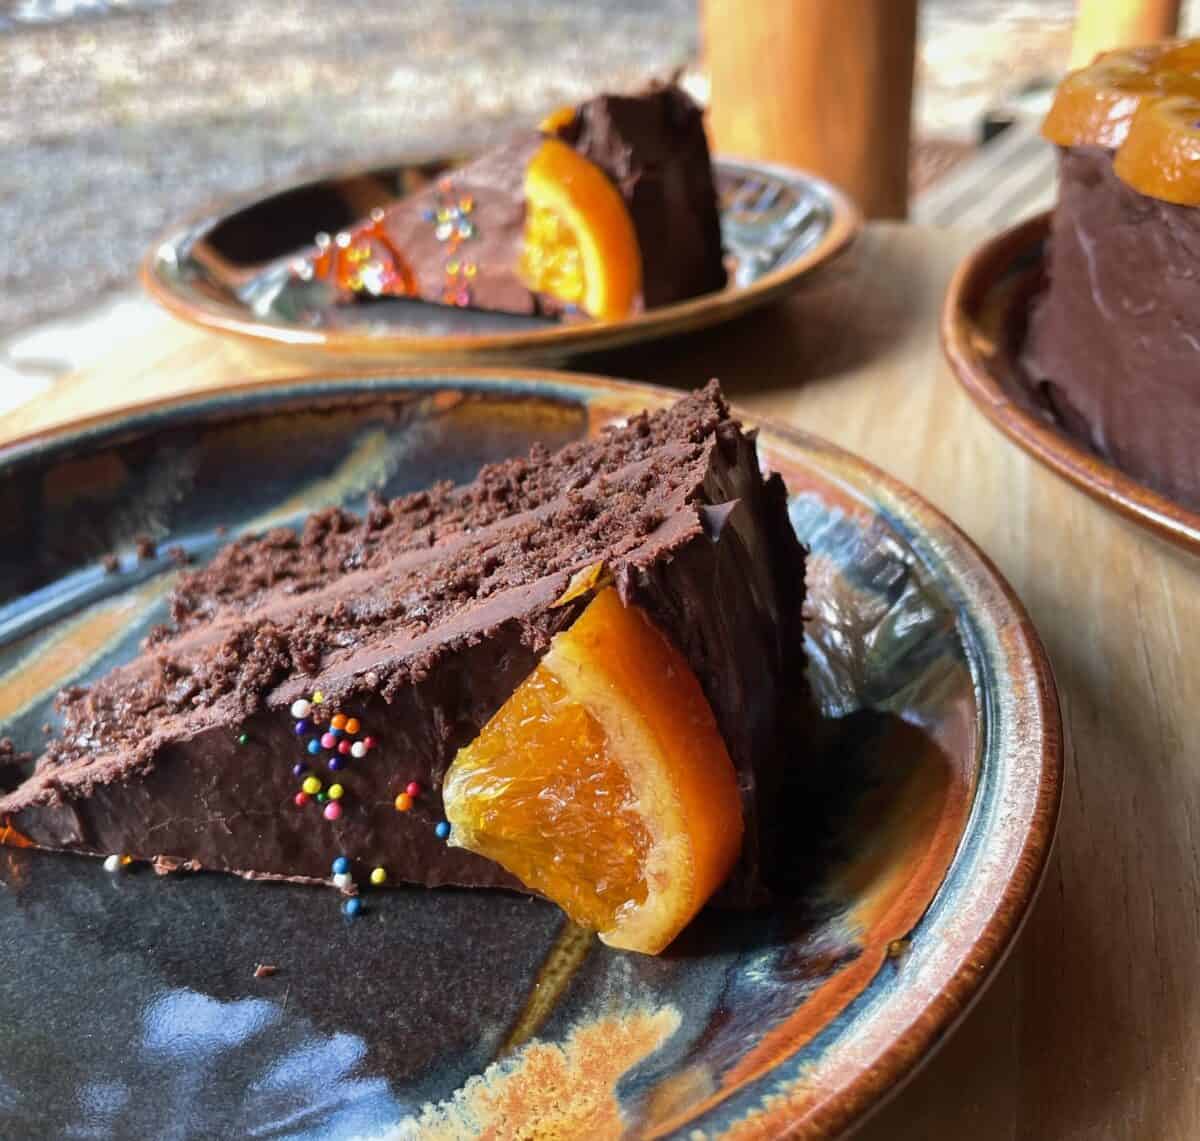 Two slices of chocolate orange cake with a candied orange wedge.